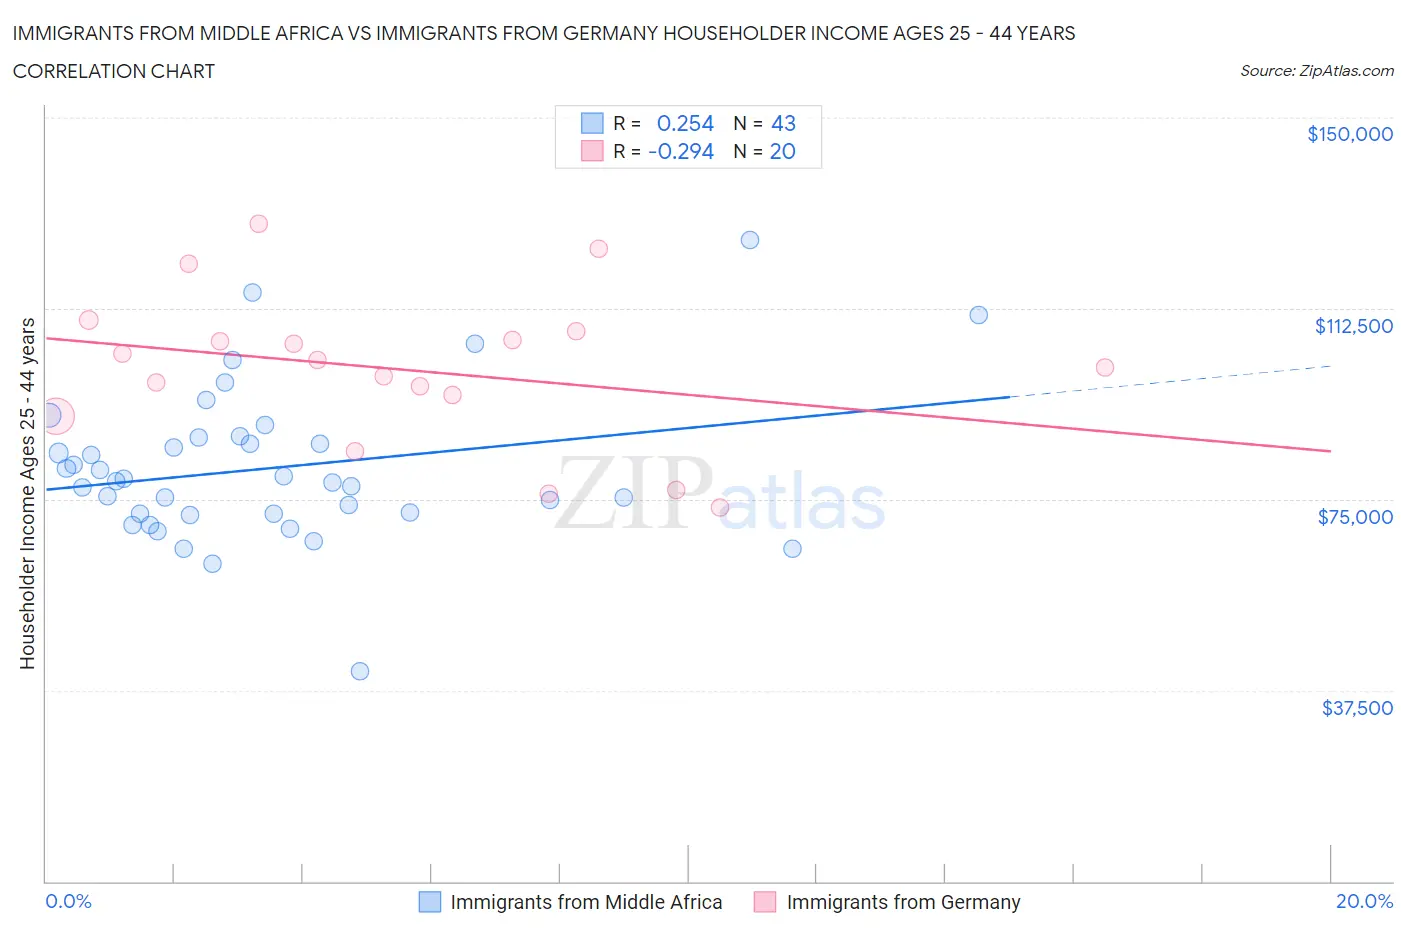 Immigrants from Middle Africa vs Immigrants from Germany Householder Income Ages 25 - 44 years